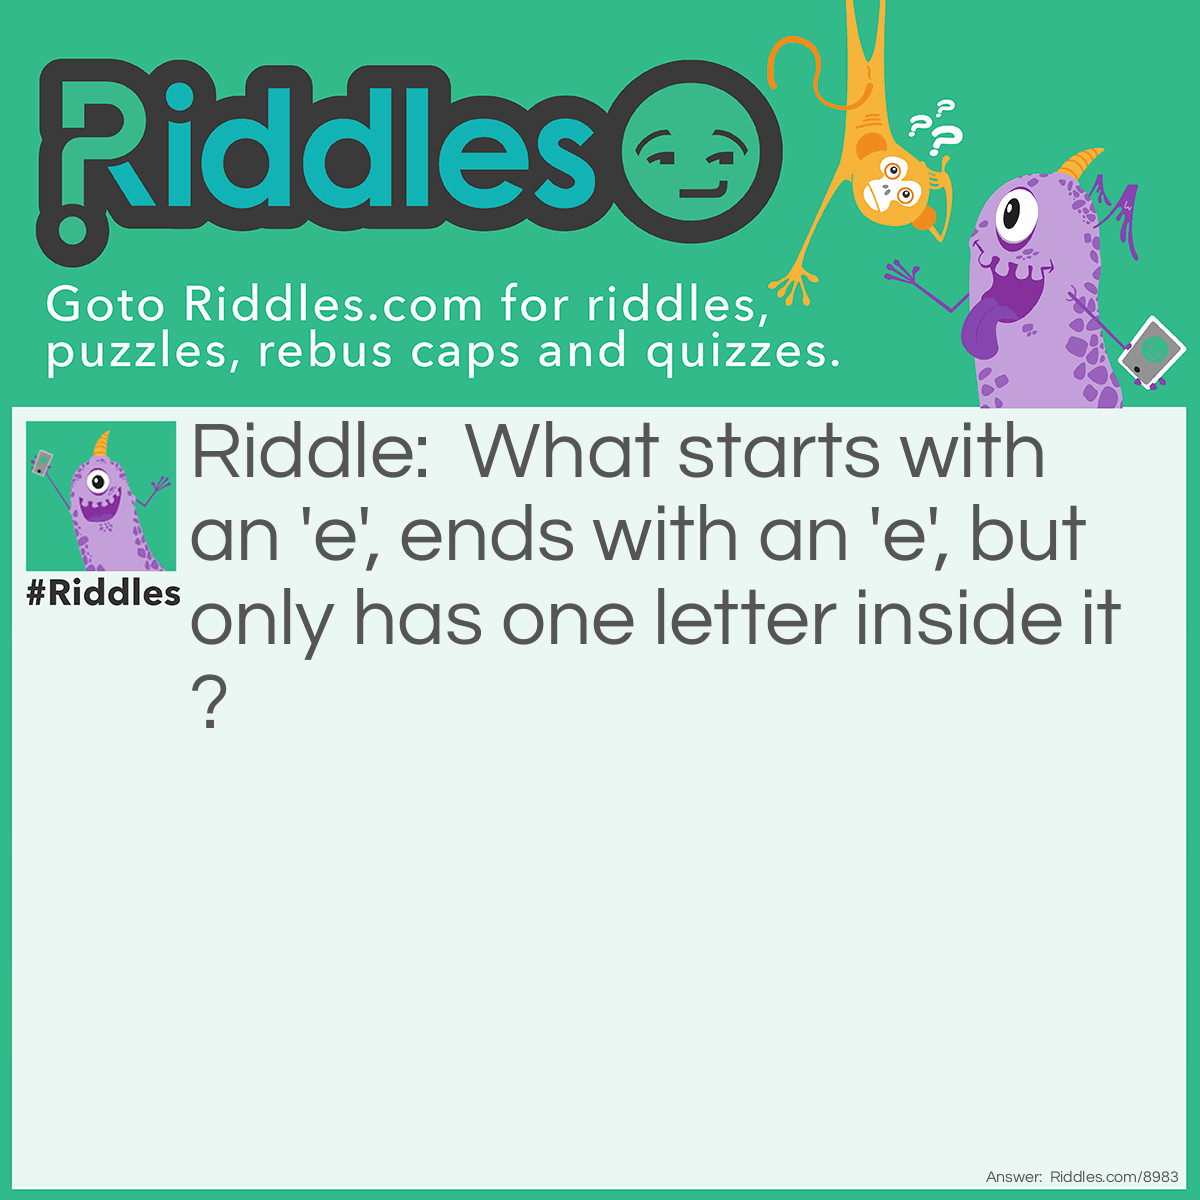 Riddle: What starts with an 'e', ends with an 'e', but only has one letter inside it? Answer: An envelope!